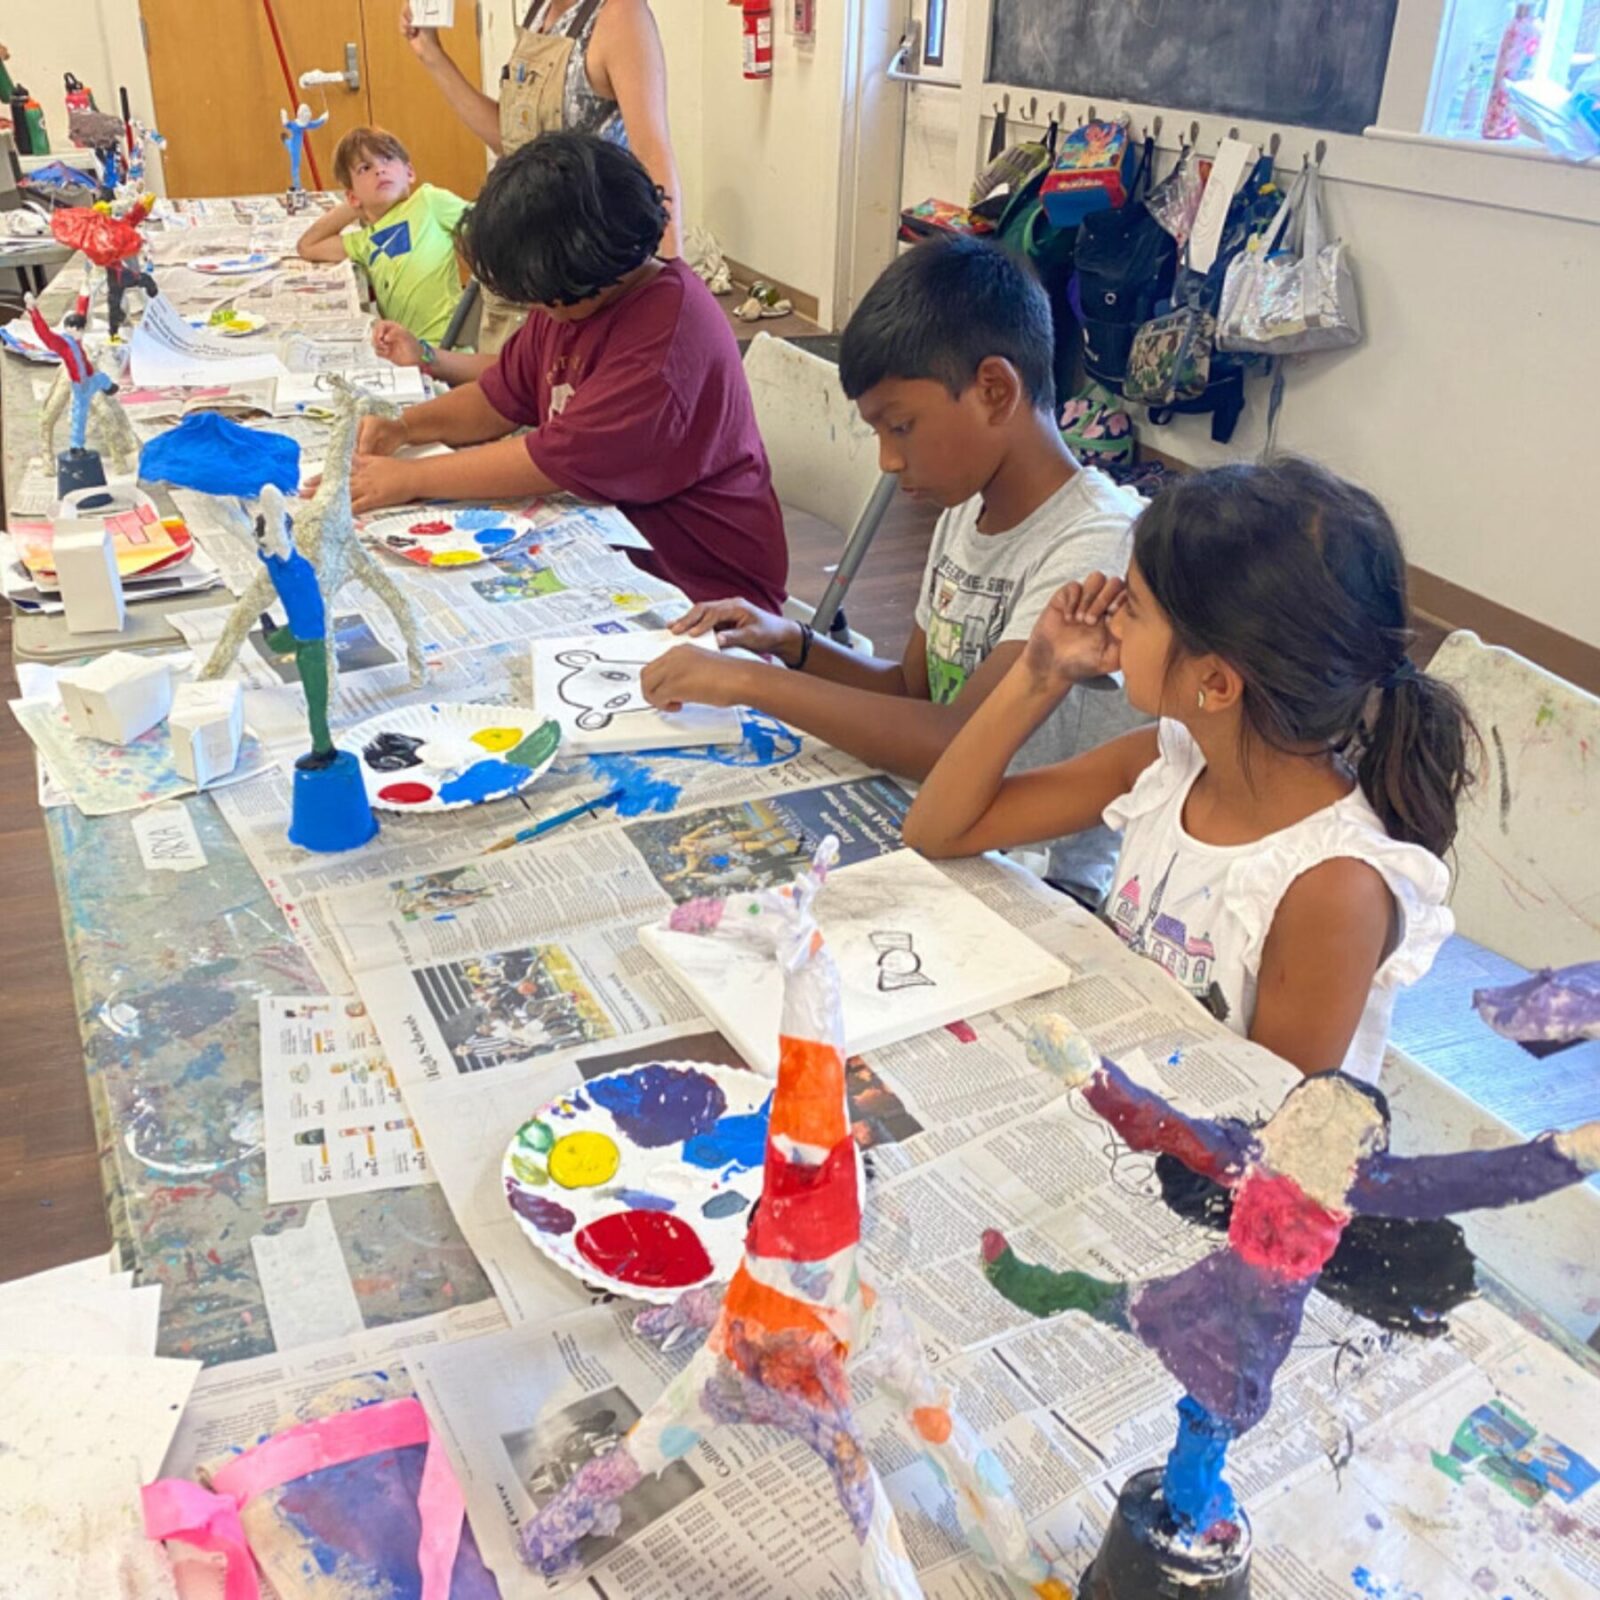 Three students painting colorful sculptures